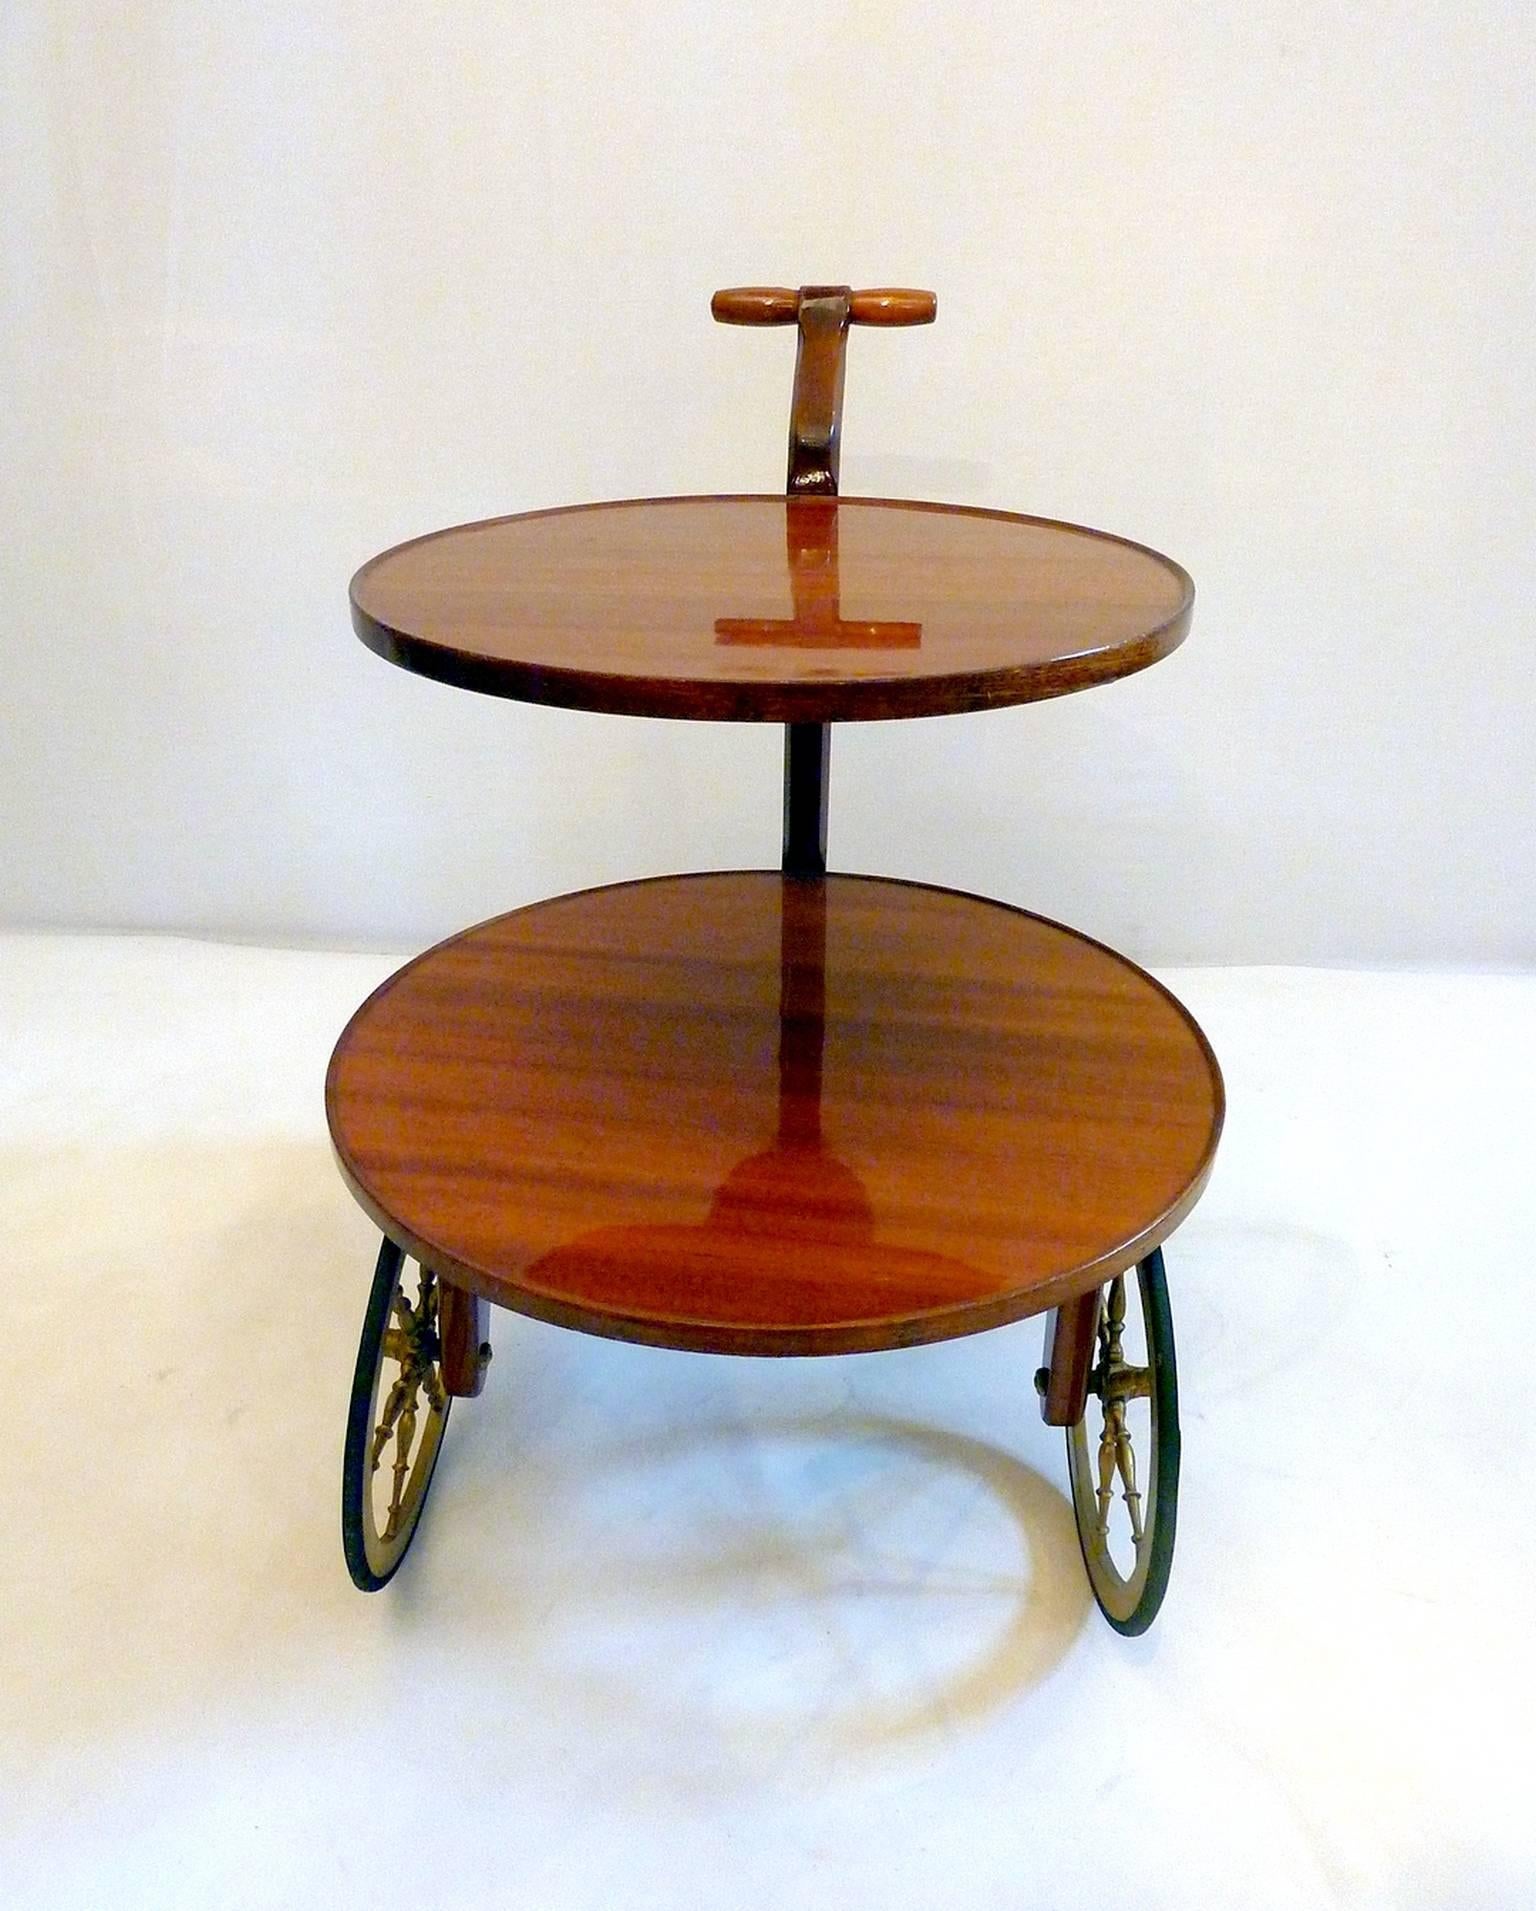 Unusual bar cart  in teak in the manner of Gio Ponti with two tiers and with a Z-shaped leg. The wheels functions well.